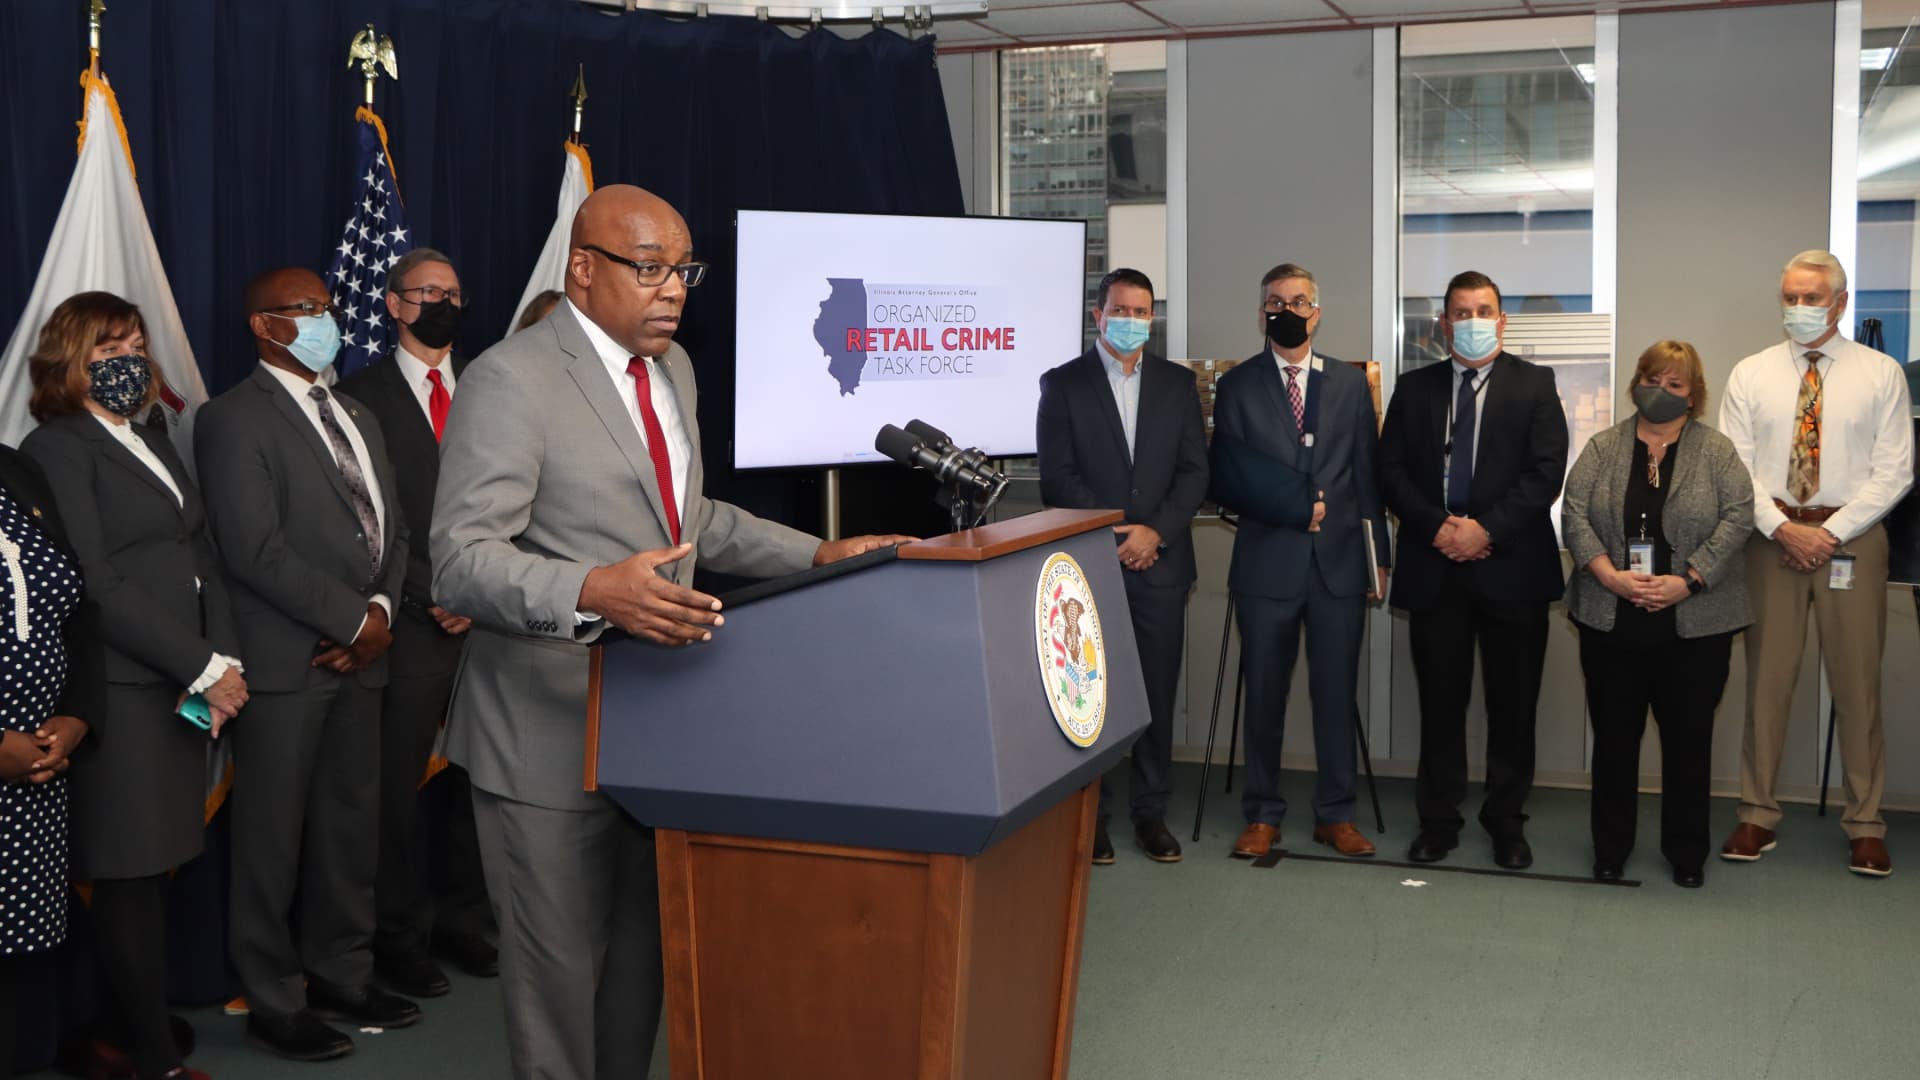 Attorney General Kwame Raoul announces the creation of the Organized Retail Crime Task Force in Chicago, Illinois, on December 2, 2021